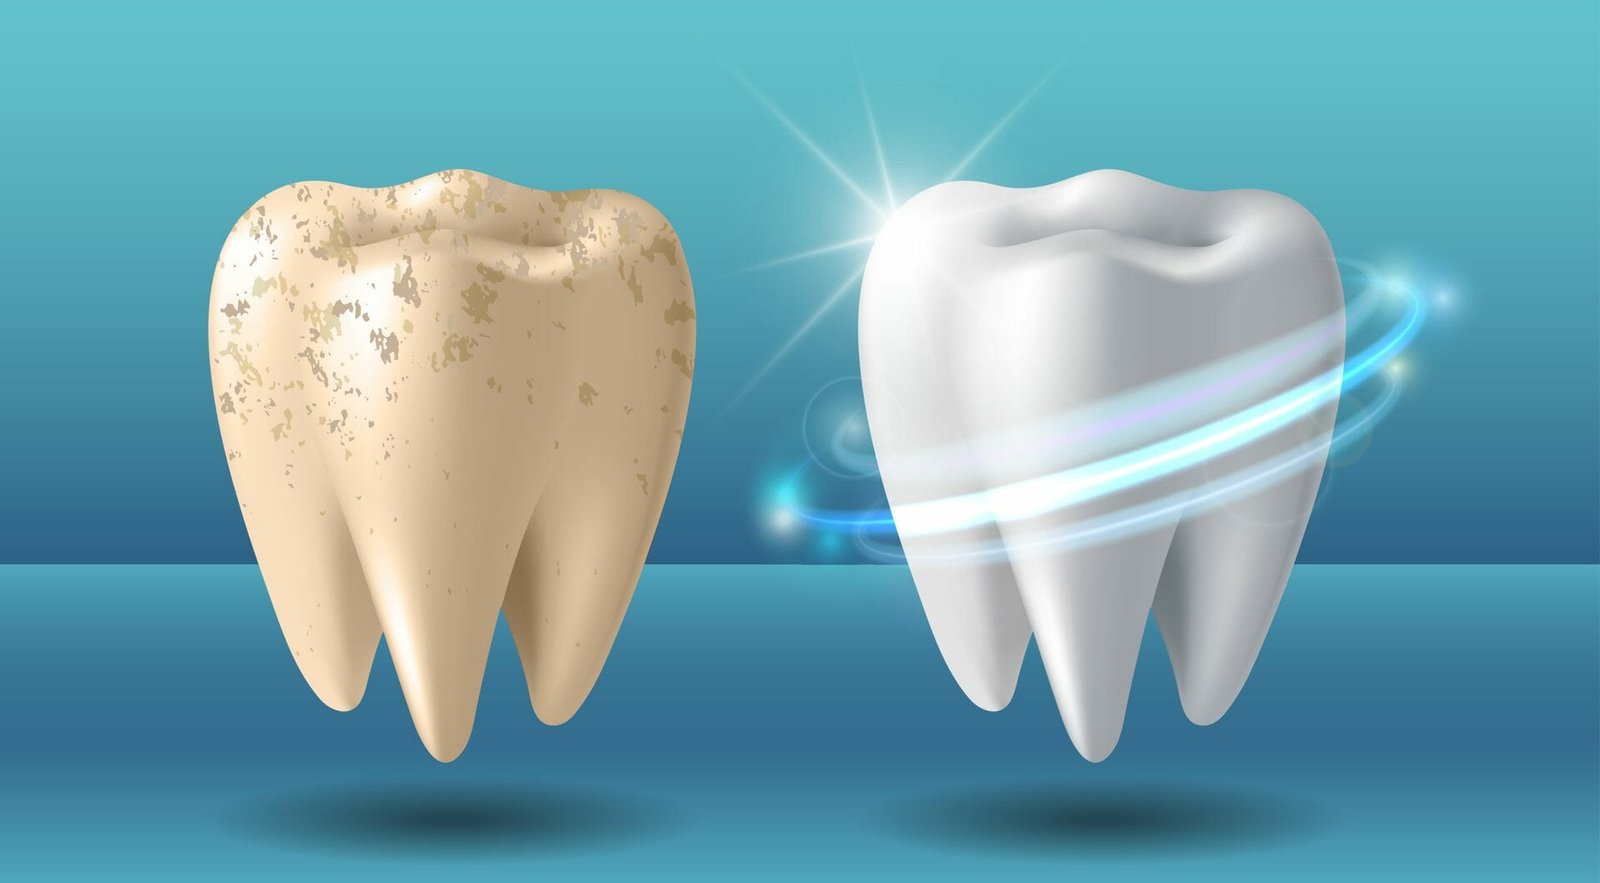 How Does The Natural Color Of Teeth Affect Whitening Outcomes?